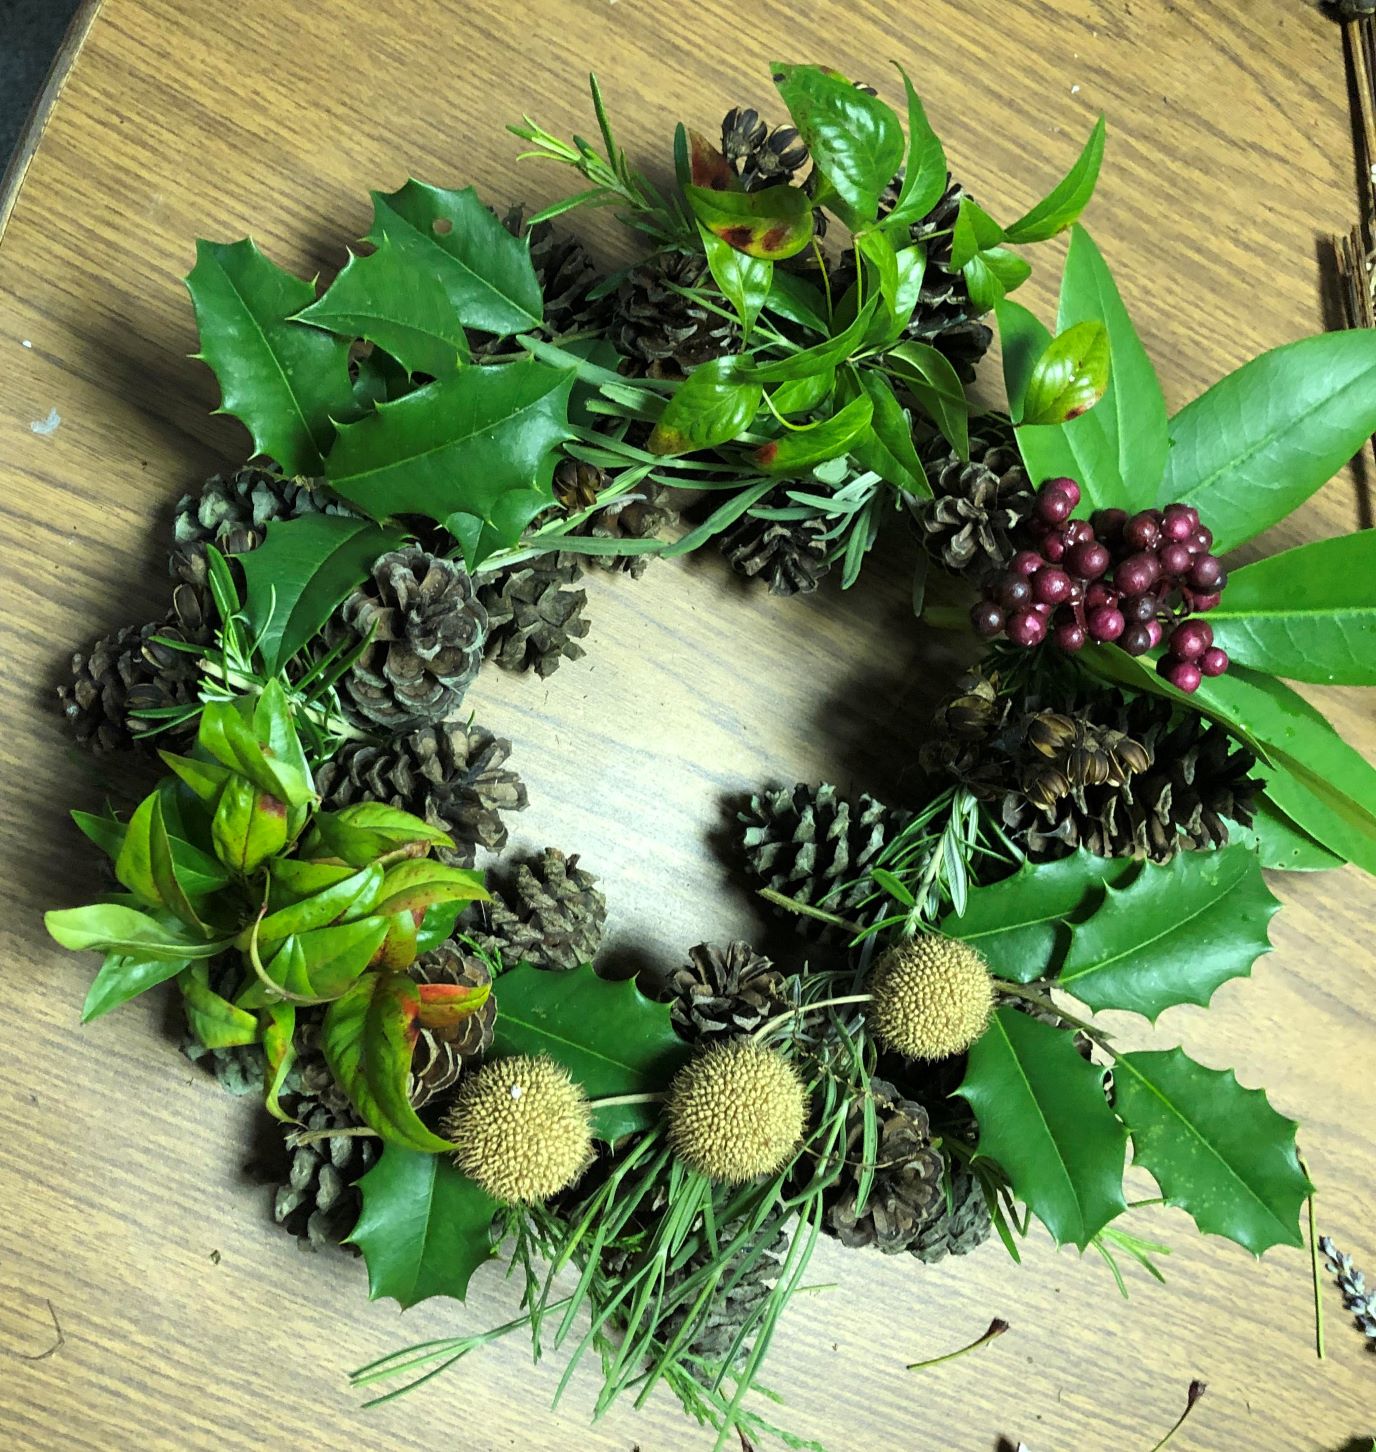 Wreath made of pine cones and greenery.